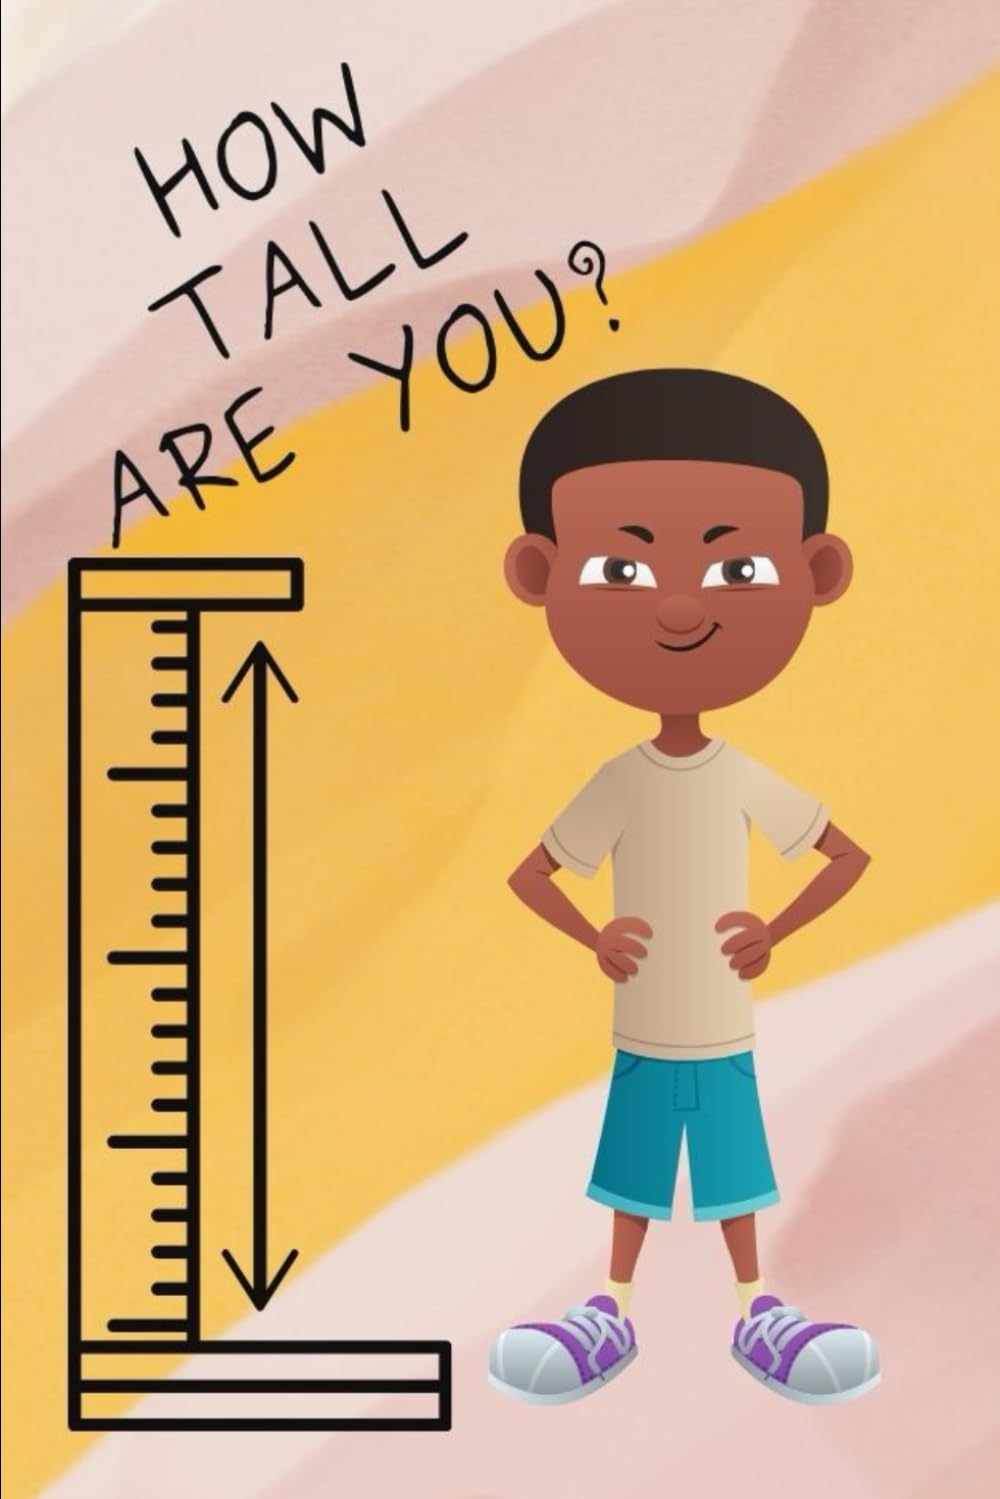 How Tall Are You?